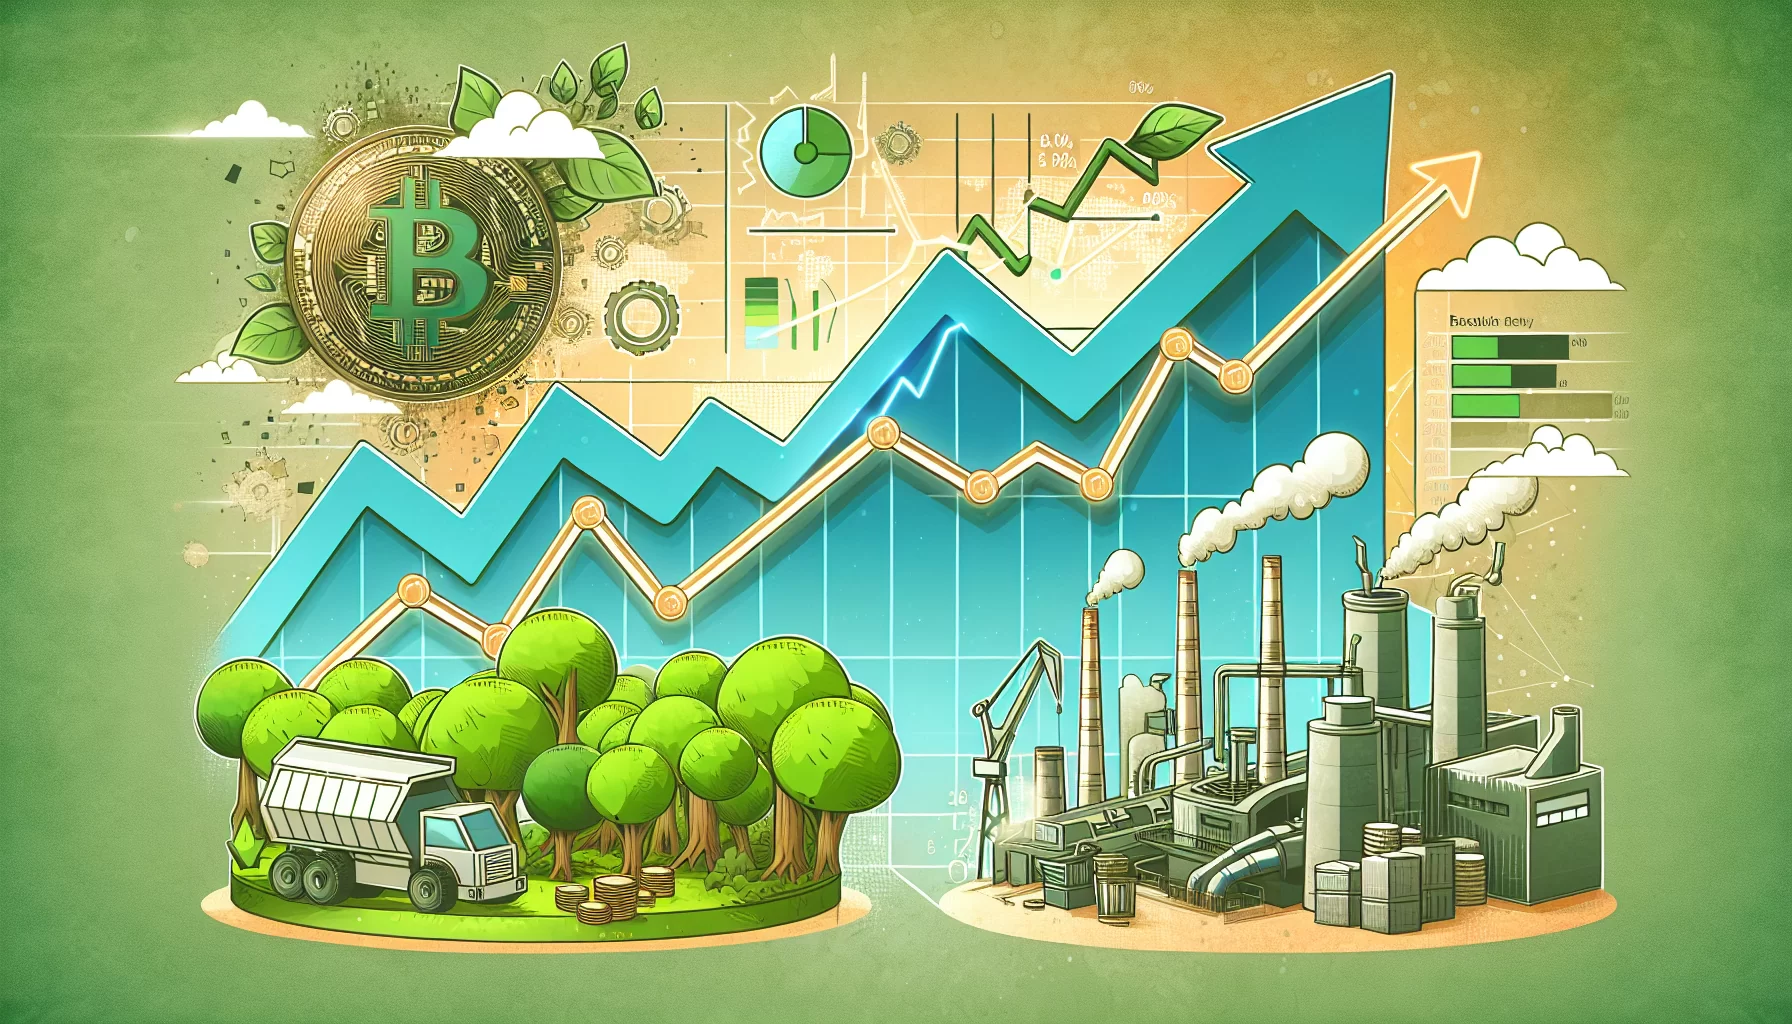 Weekly roundup of Bitcoin: price trends, analyst predictions, and environmental debates